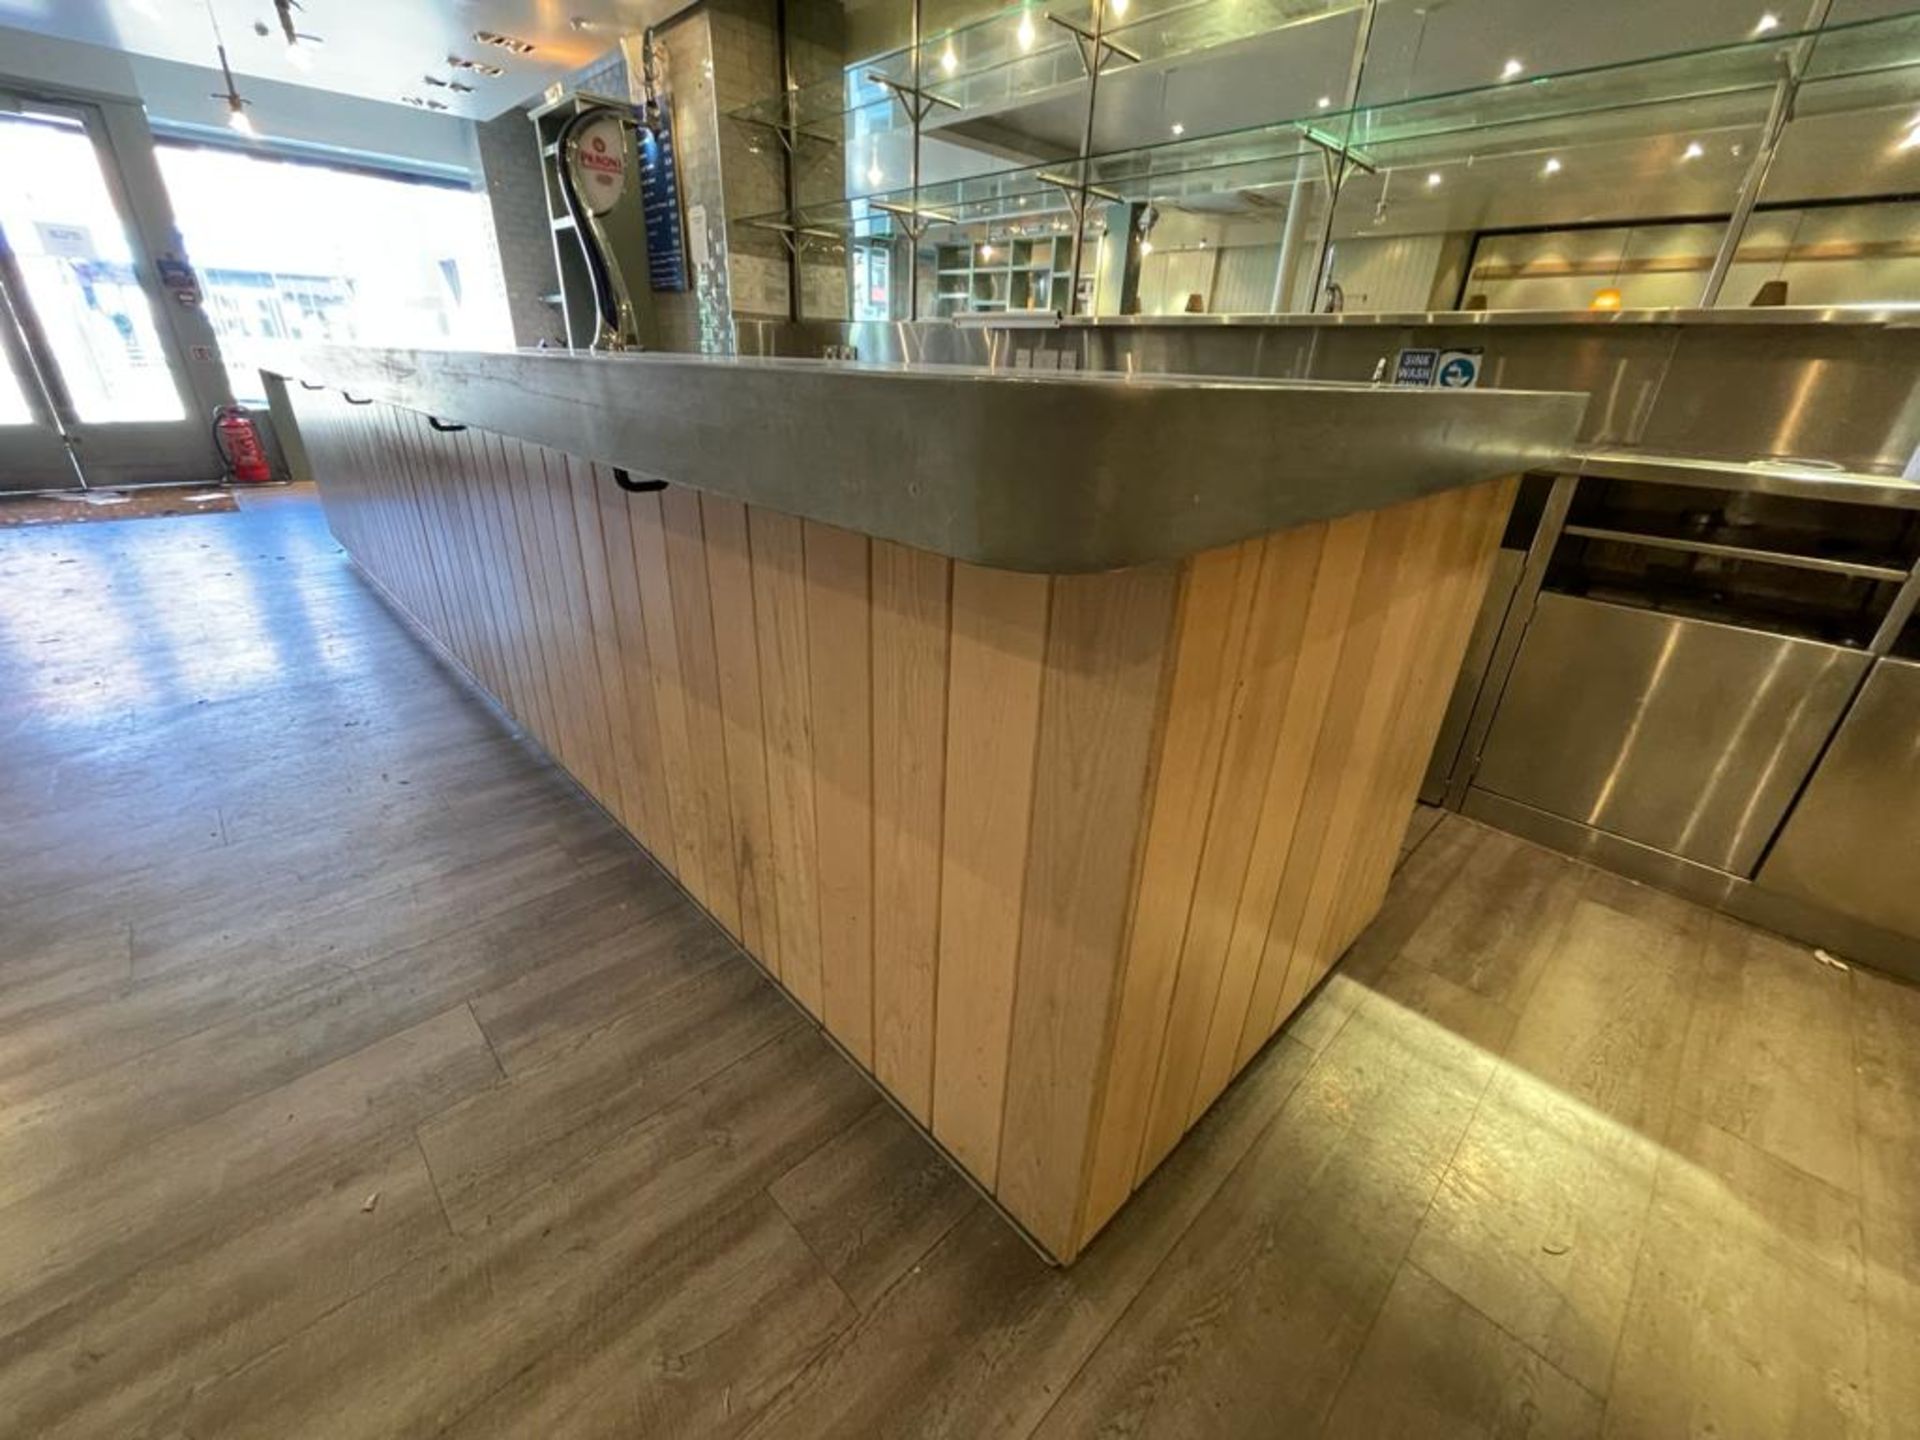 1 x Contemporary Restaurant Bar With Light Wood Panel Fascia, Sheet Metal Covered Bar Top, - Image 11 of 57